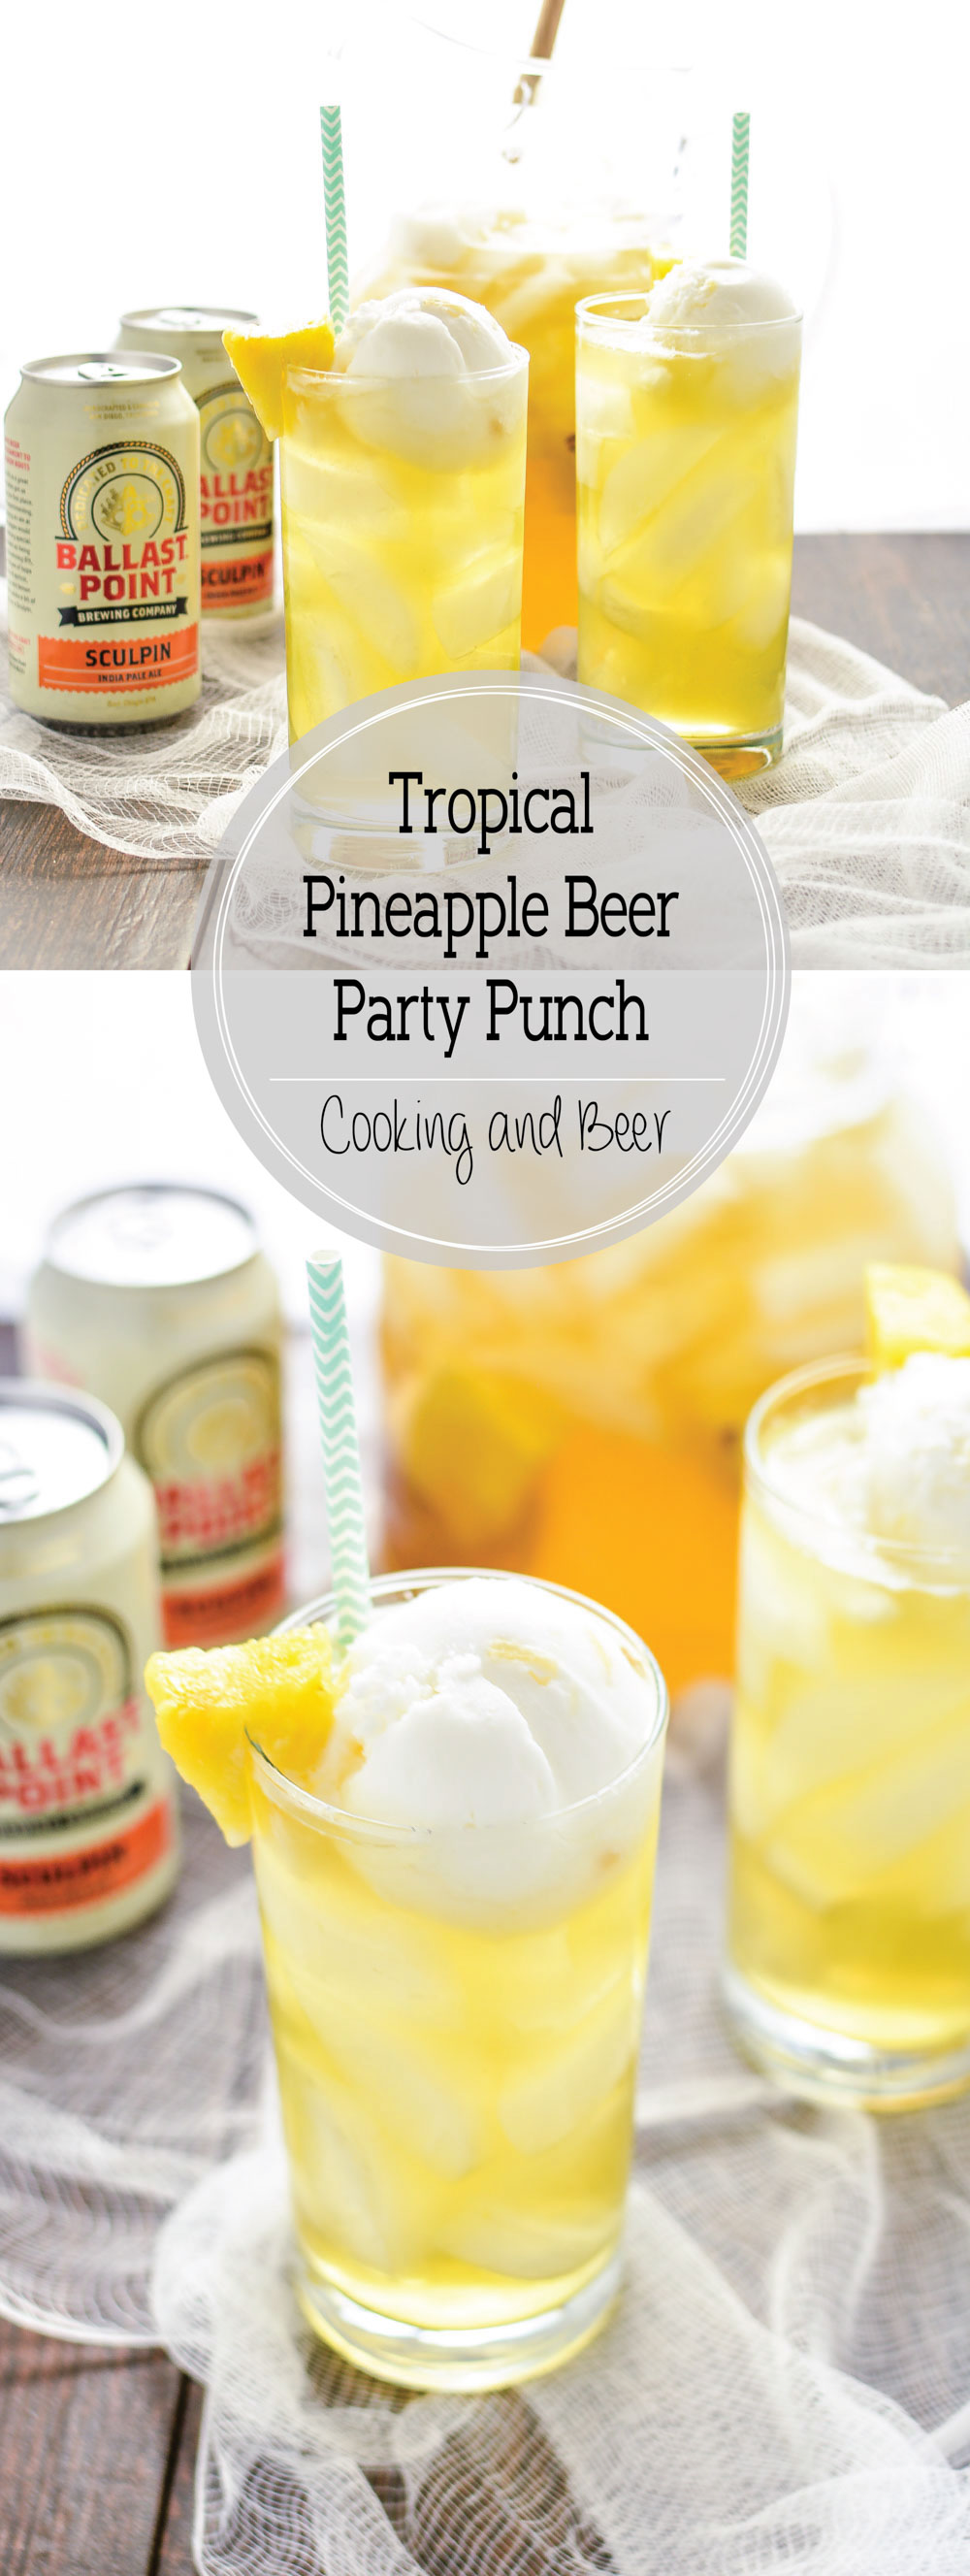 Tropical Pineapple Beer Party Punch is the perfect drink to serve at your next summer party, picnic, or barbecue!